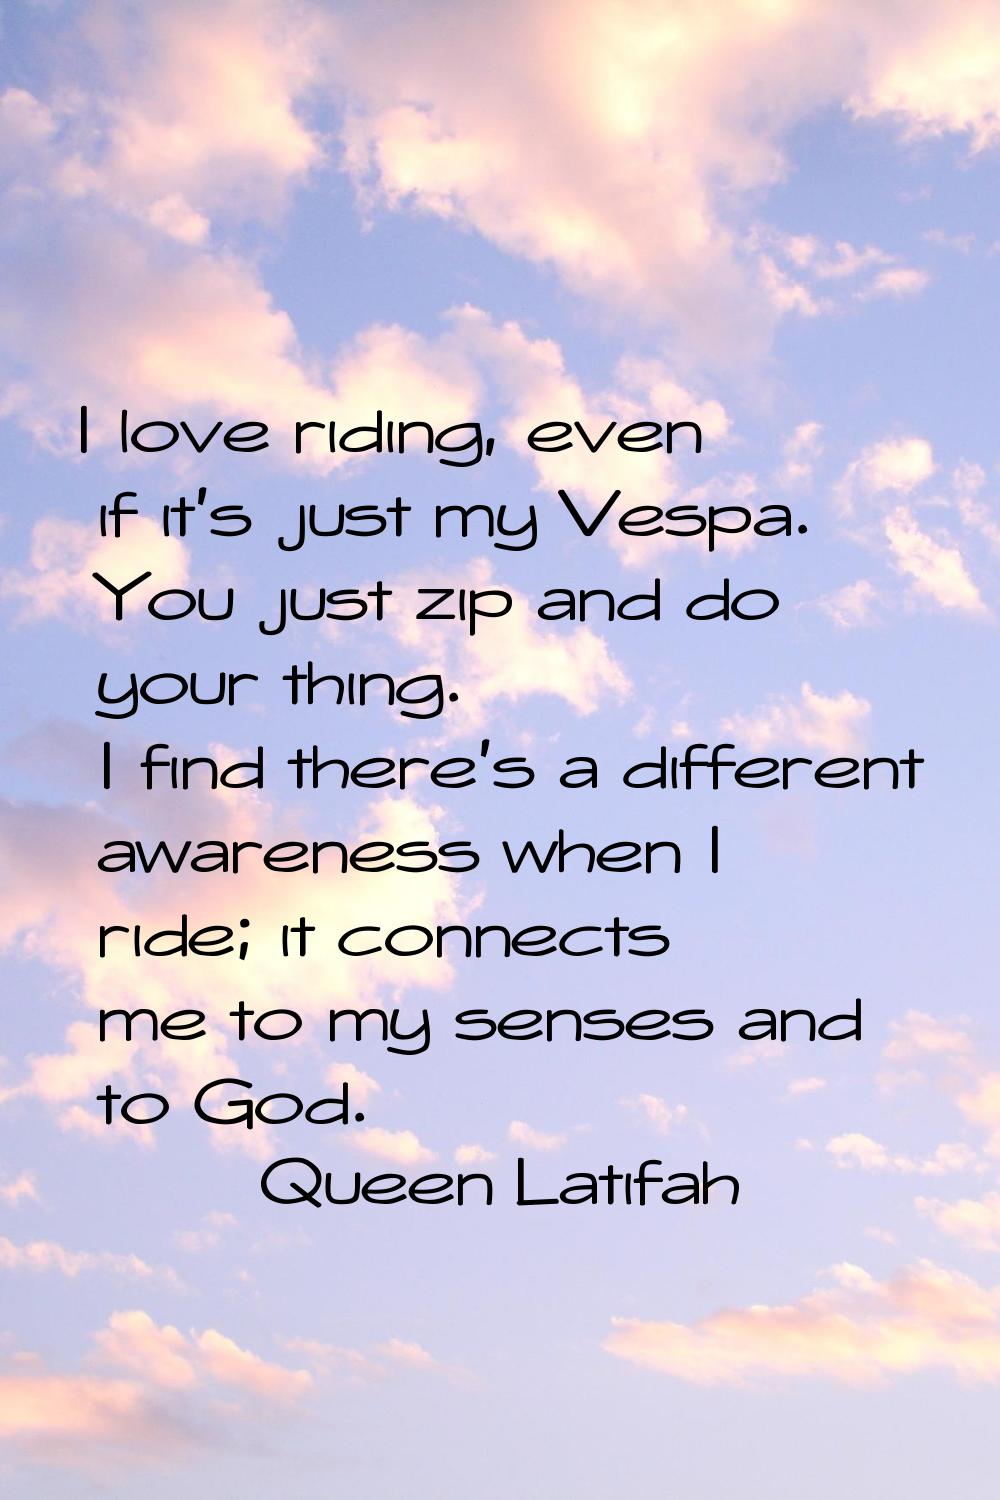 I love riding, even if it's just my Vespa. You just zip and do your thing. I find there's a differe